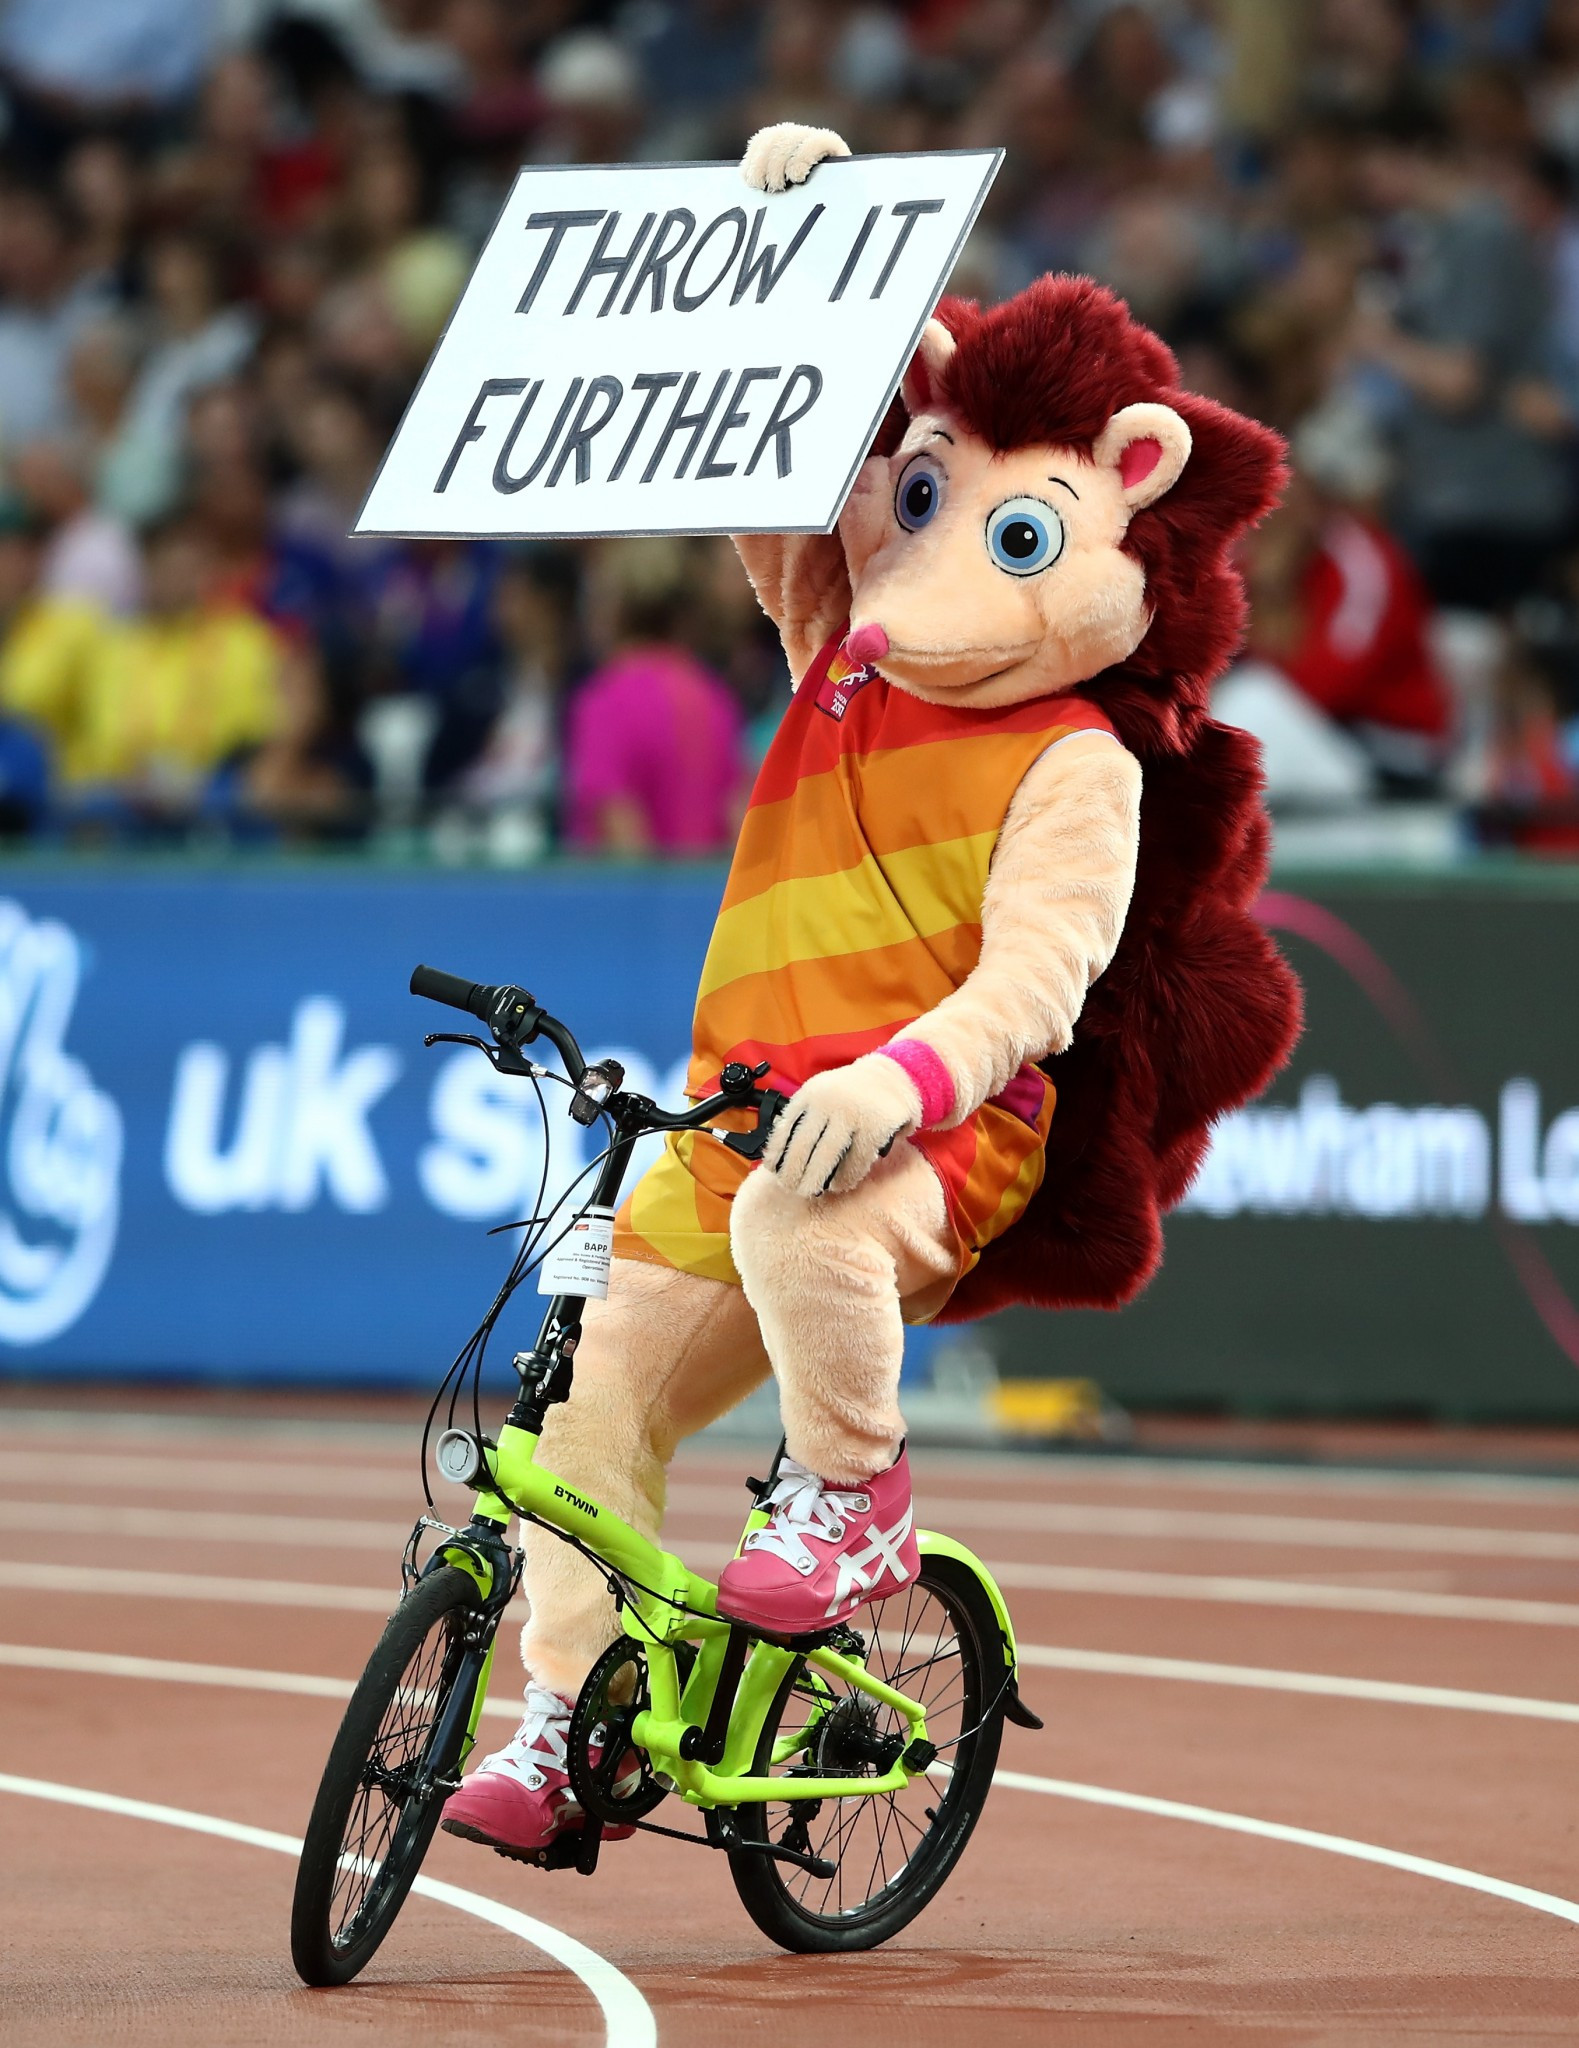 Coaching advice was only a small part of the contribution made to the recent IAAF World Championships in London by the official mascot, Hero the Hedgehog, who has set the bar for 